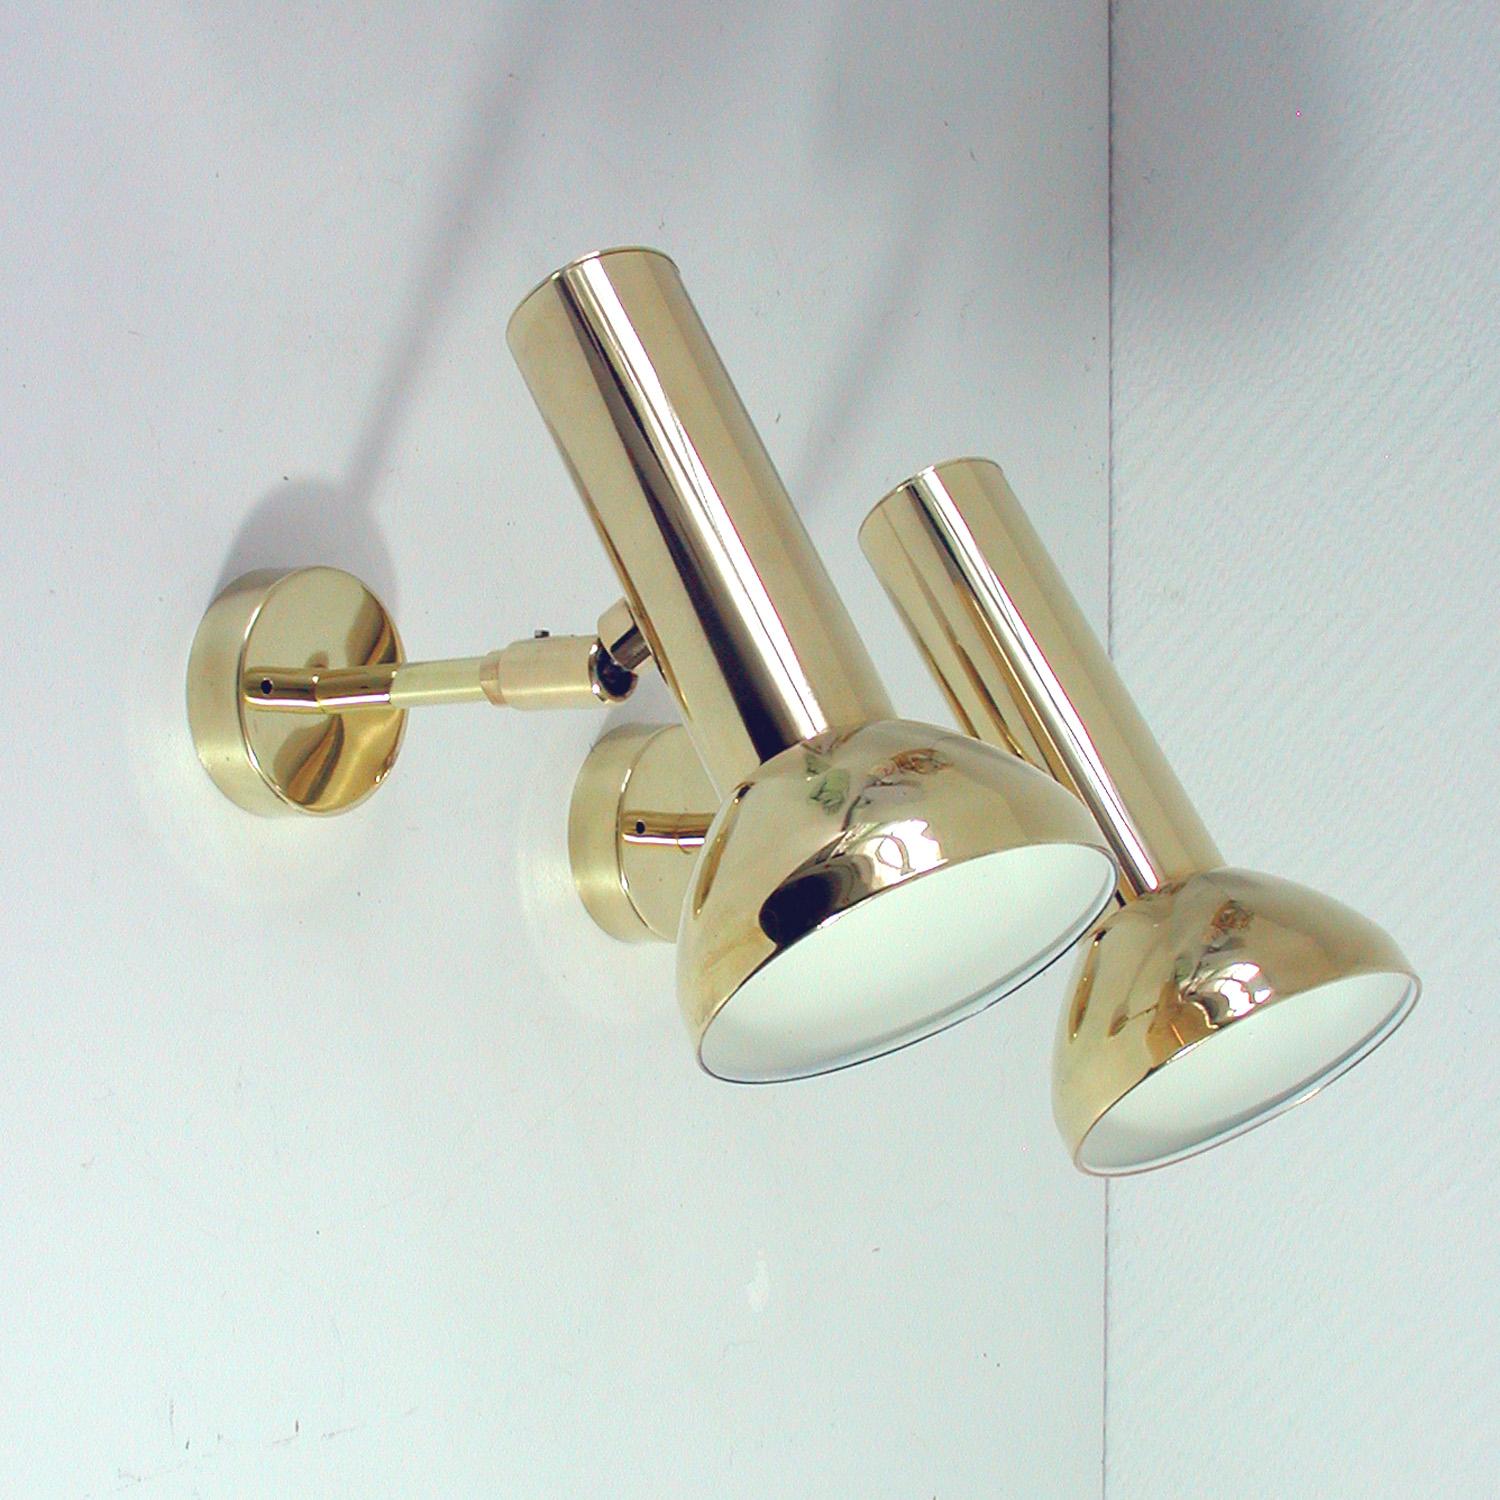 Mid-20th Century Pair of Midcentury German Brass Wall Lights by Cosack, 1960s For Sale